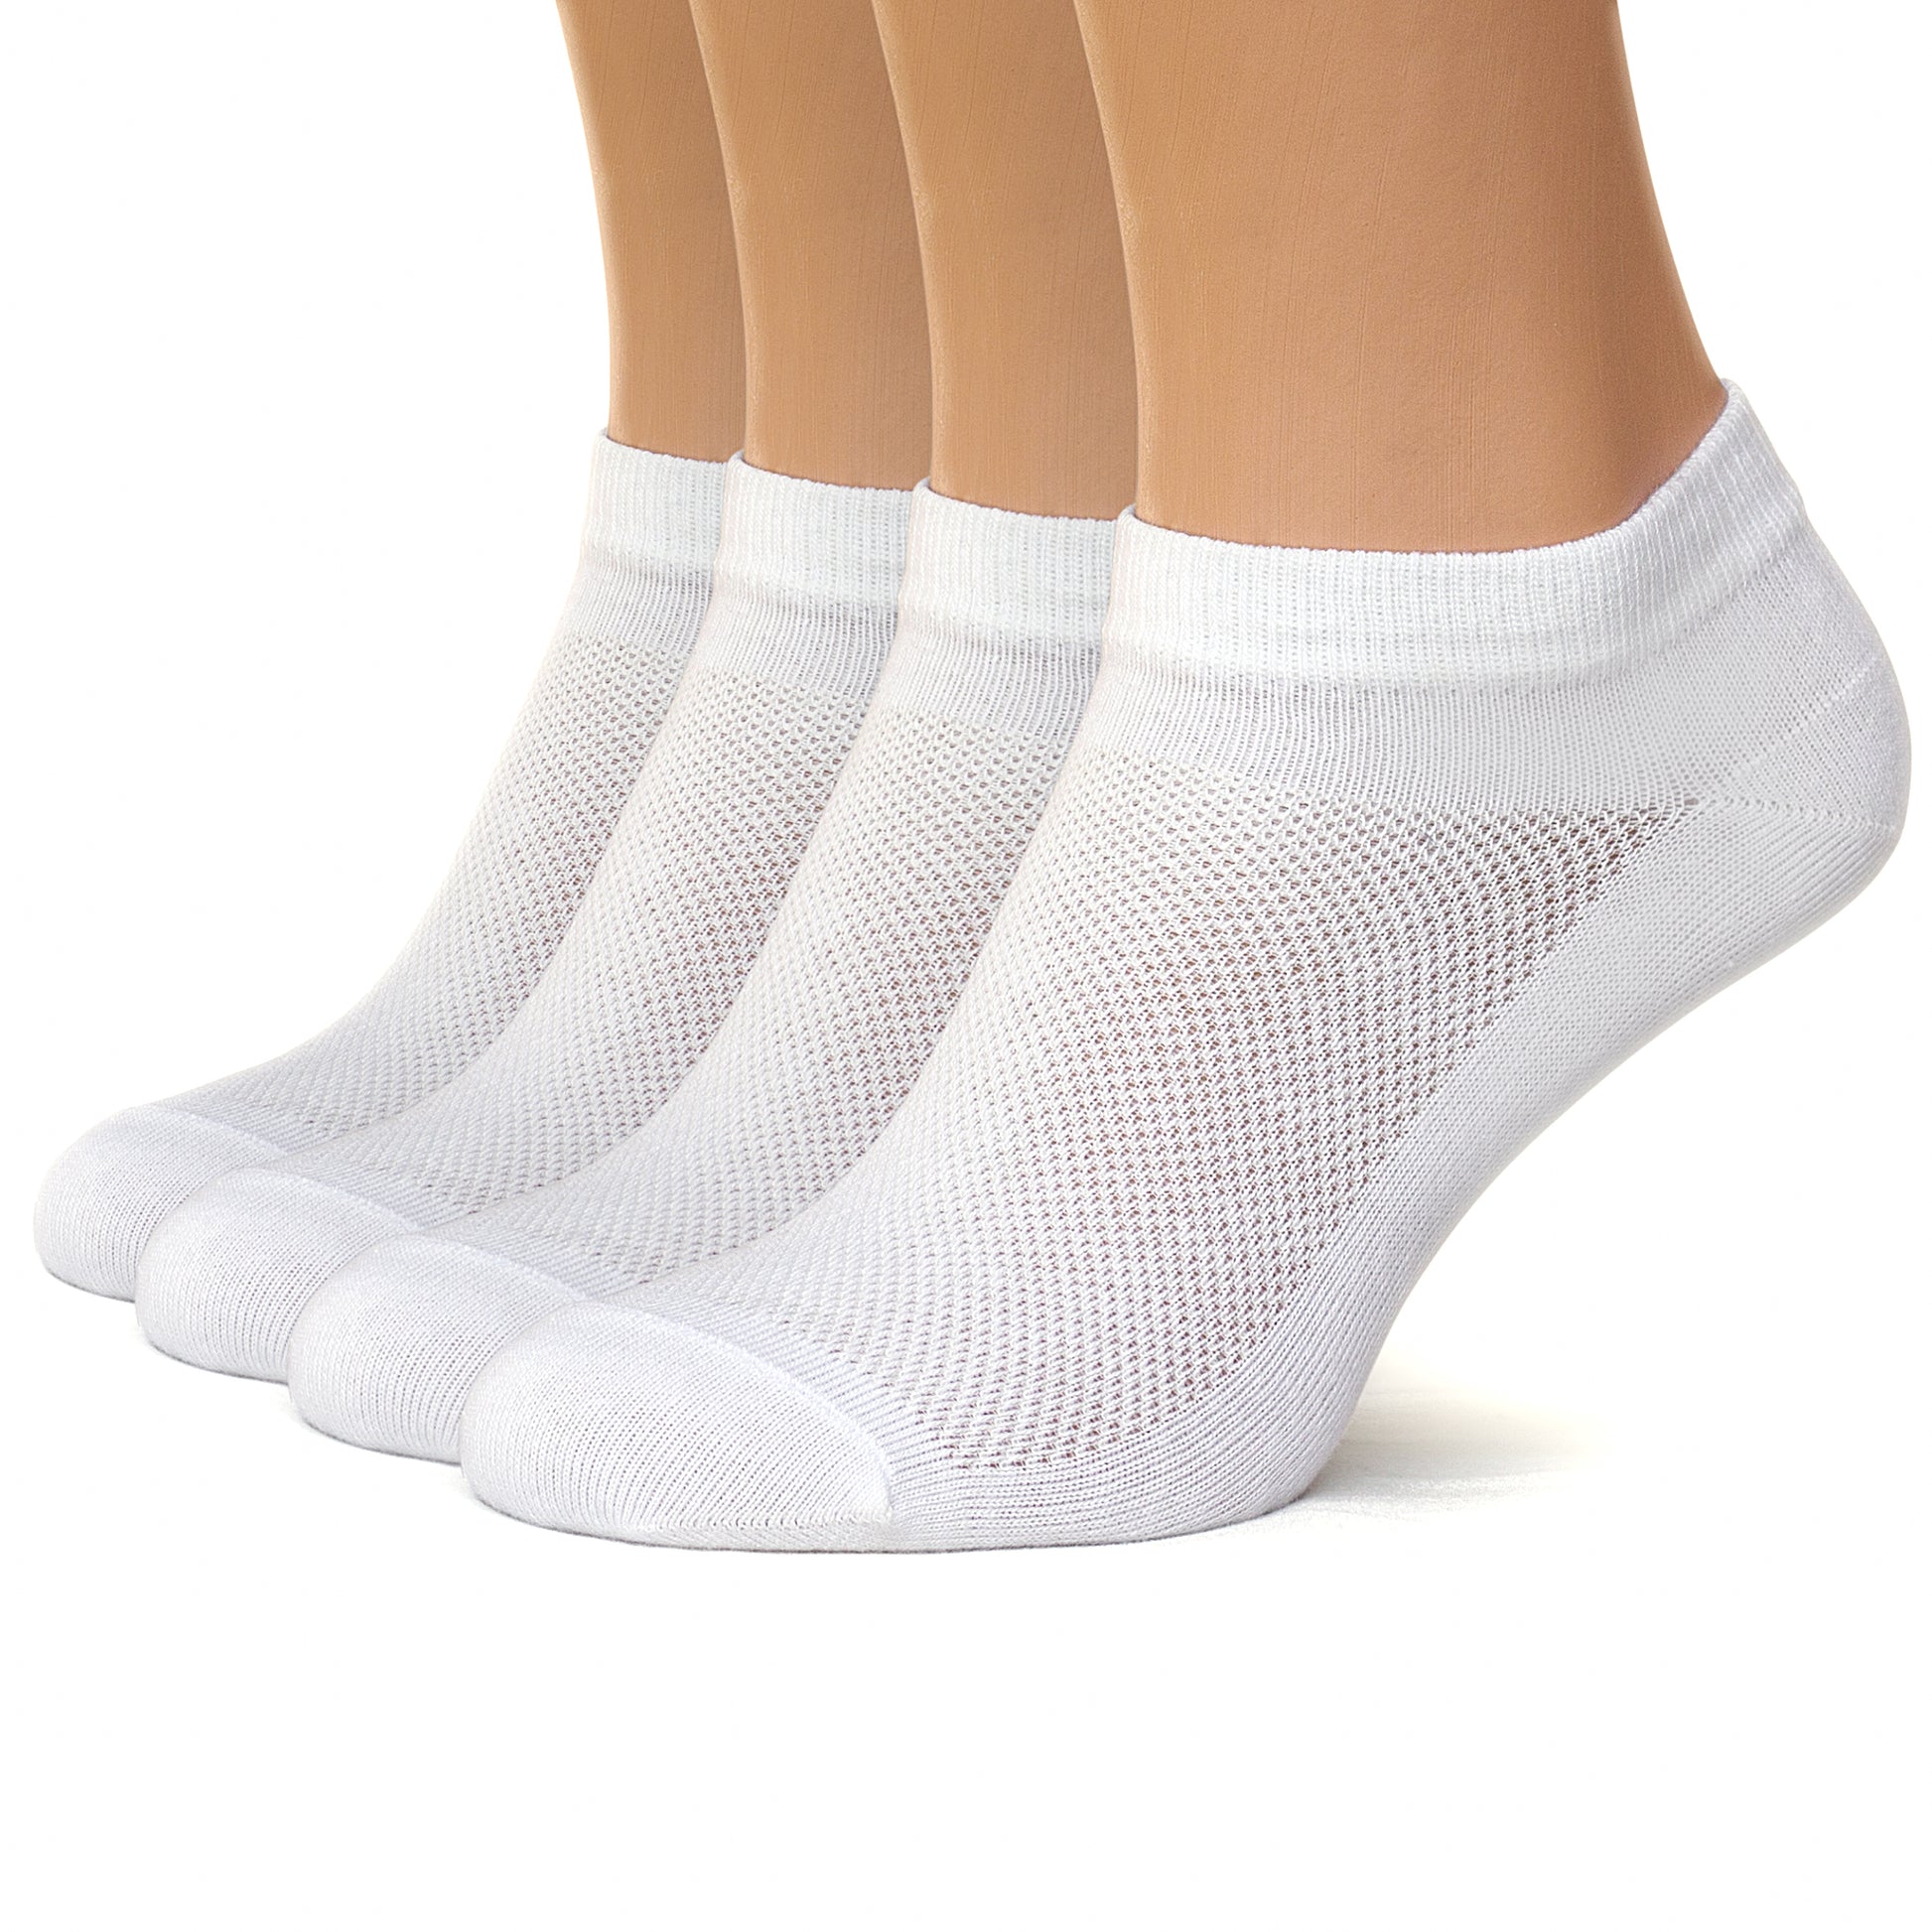 Unisex Ultra Thin Womens Socks Breathable Cotton Ankle Socks, size